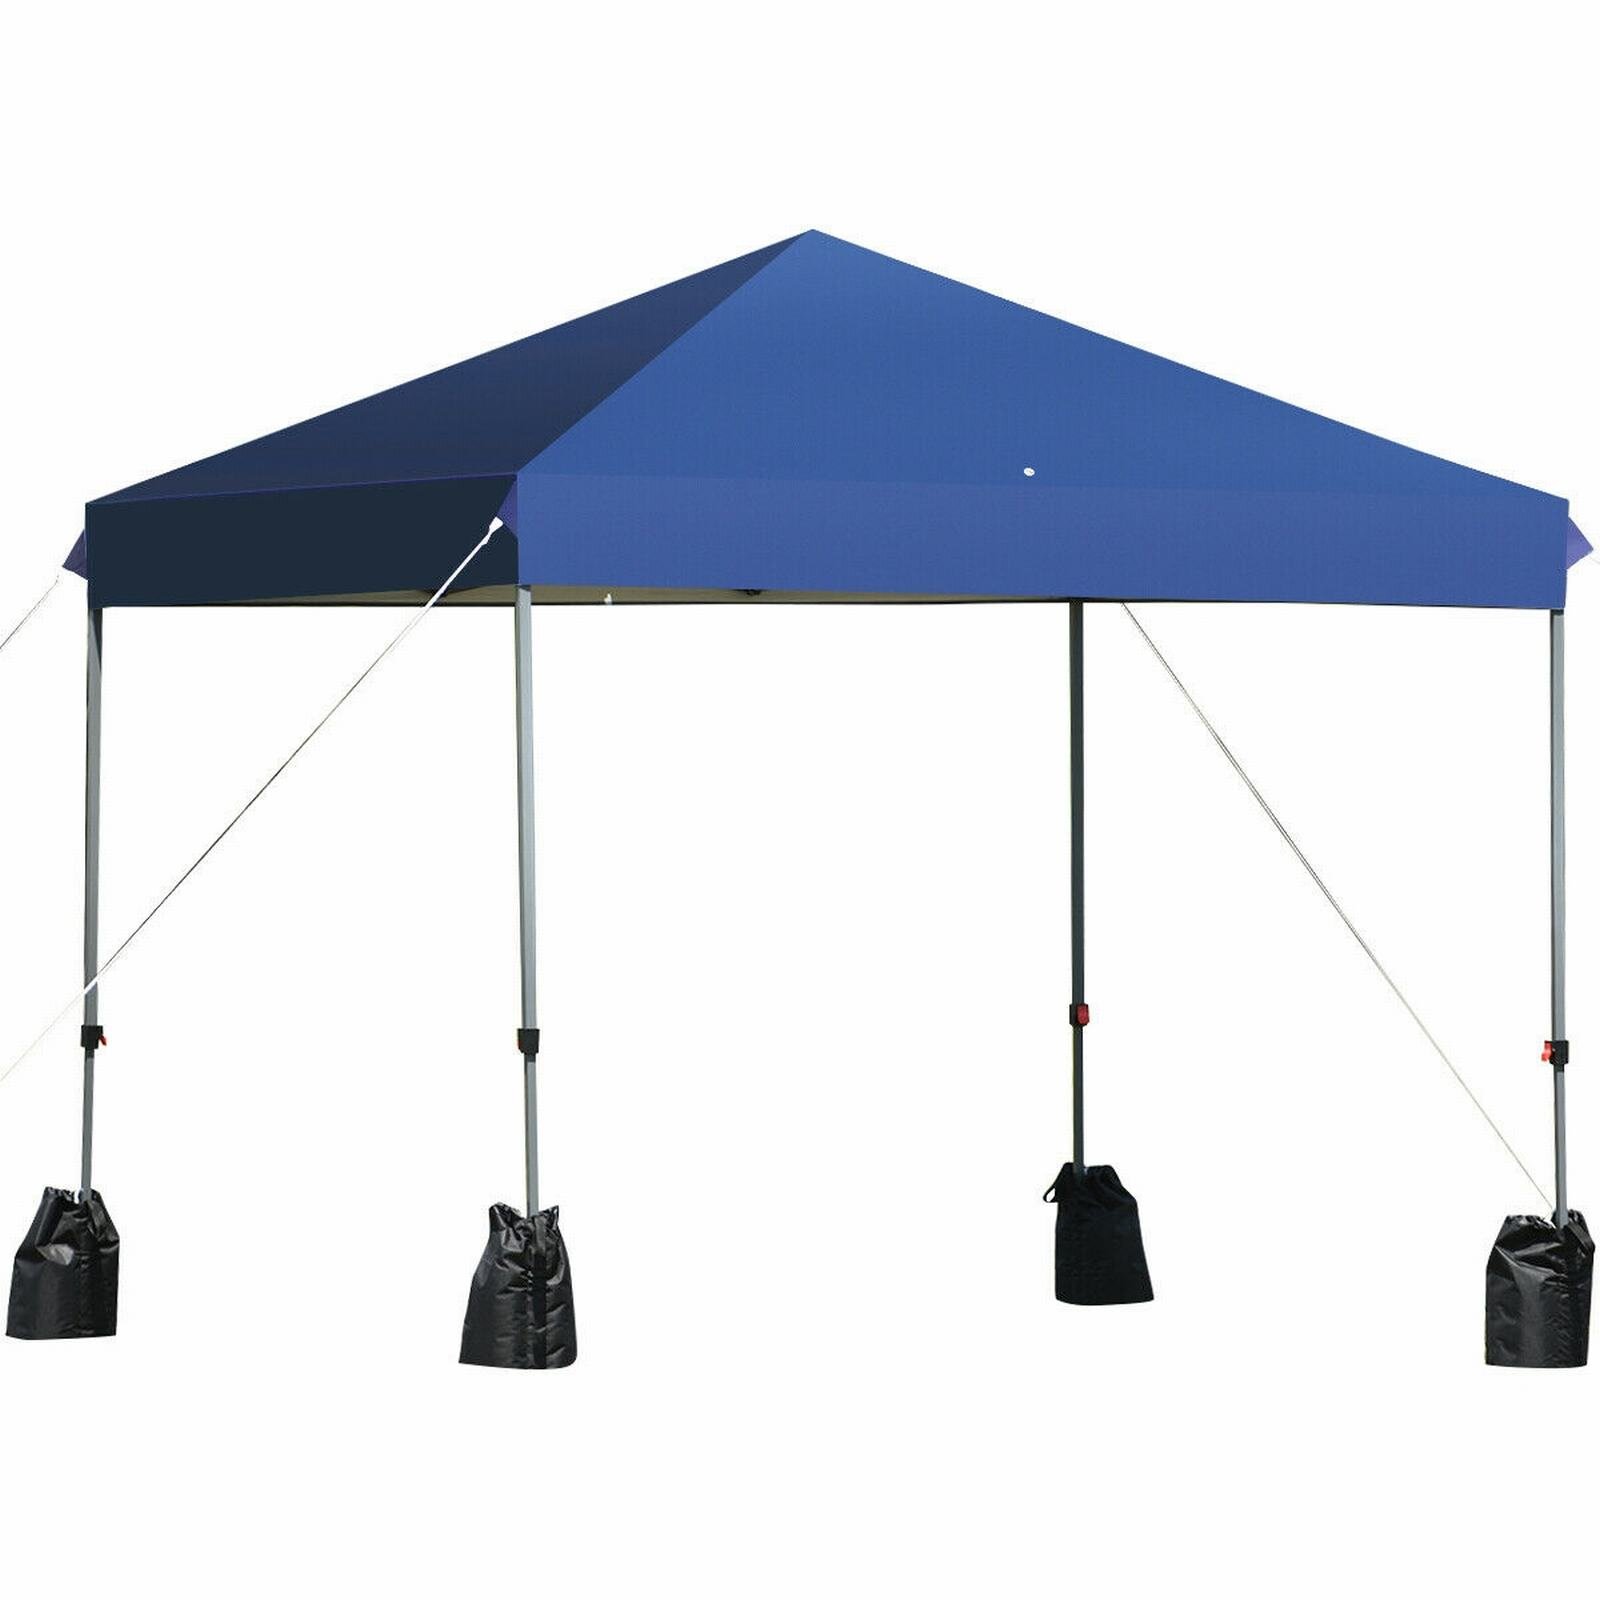 6 Colors Available 8'x8' Pop Up Canopy Folding Party Tent